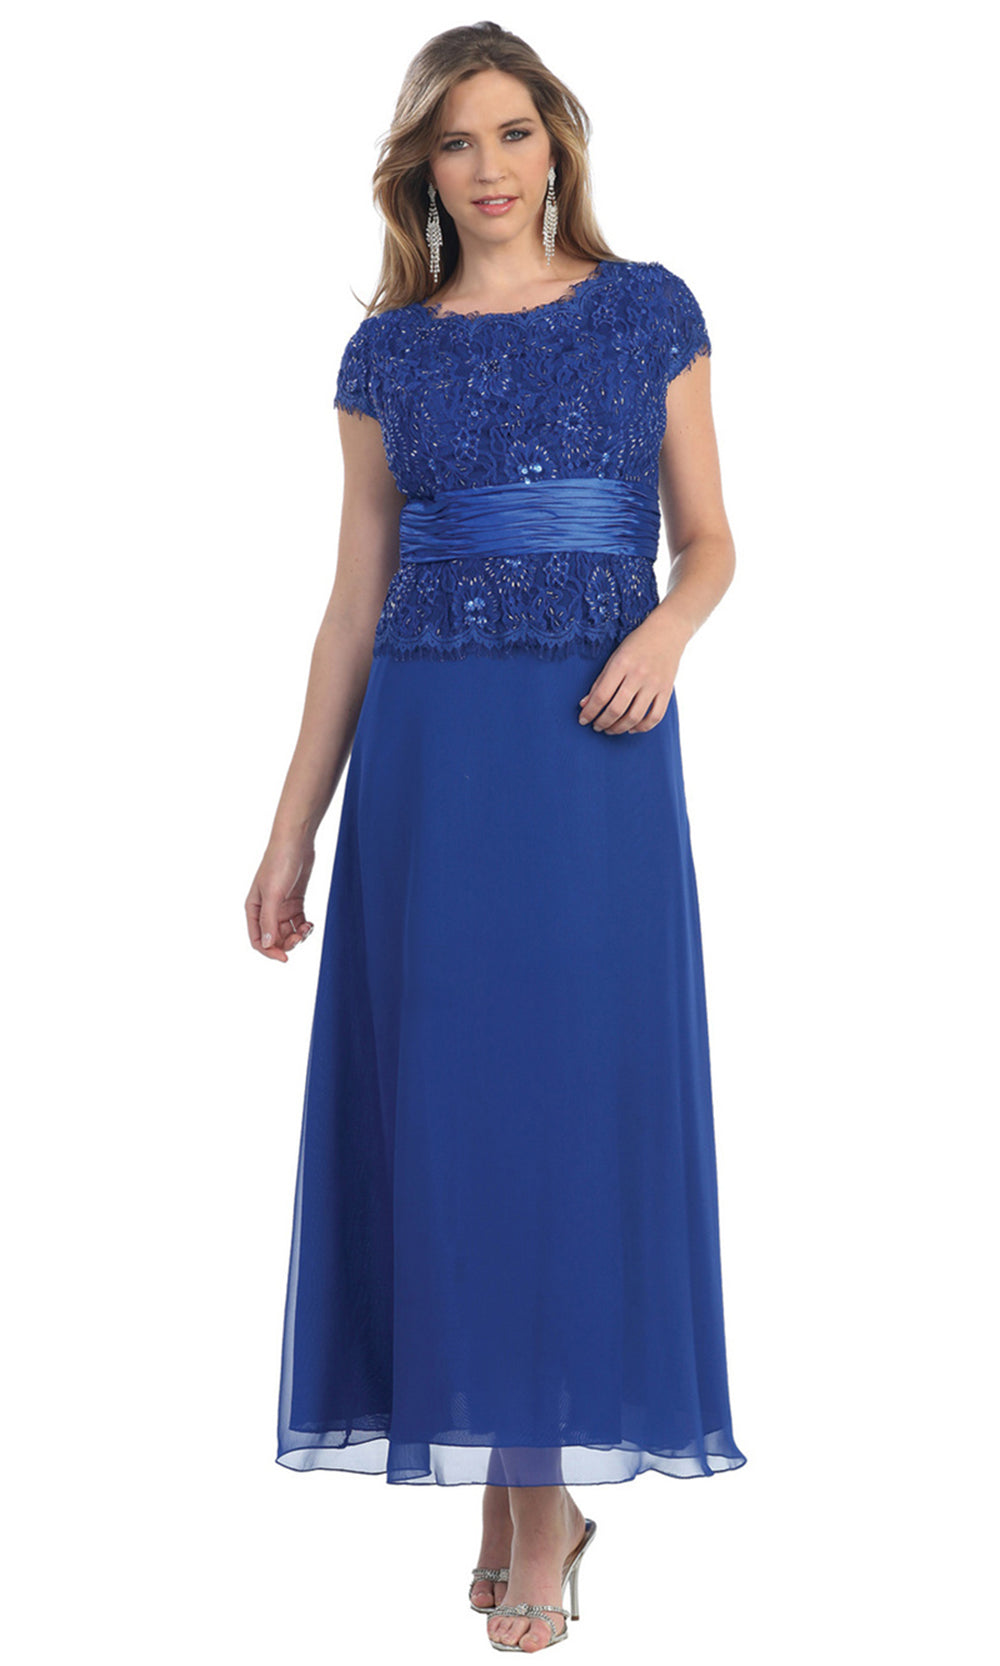 May Queen - MQ571 Chiffon Lace Jewel Neck Formal Dress In Blue